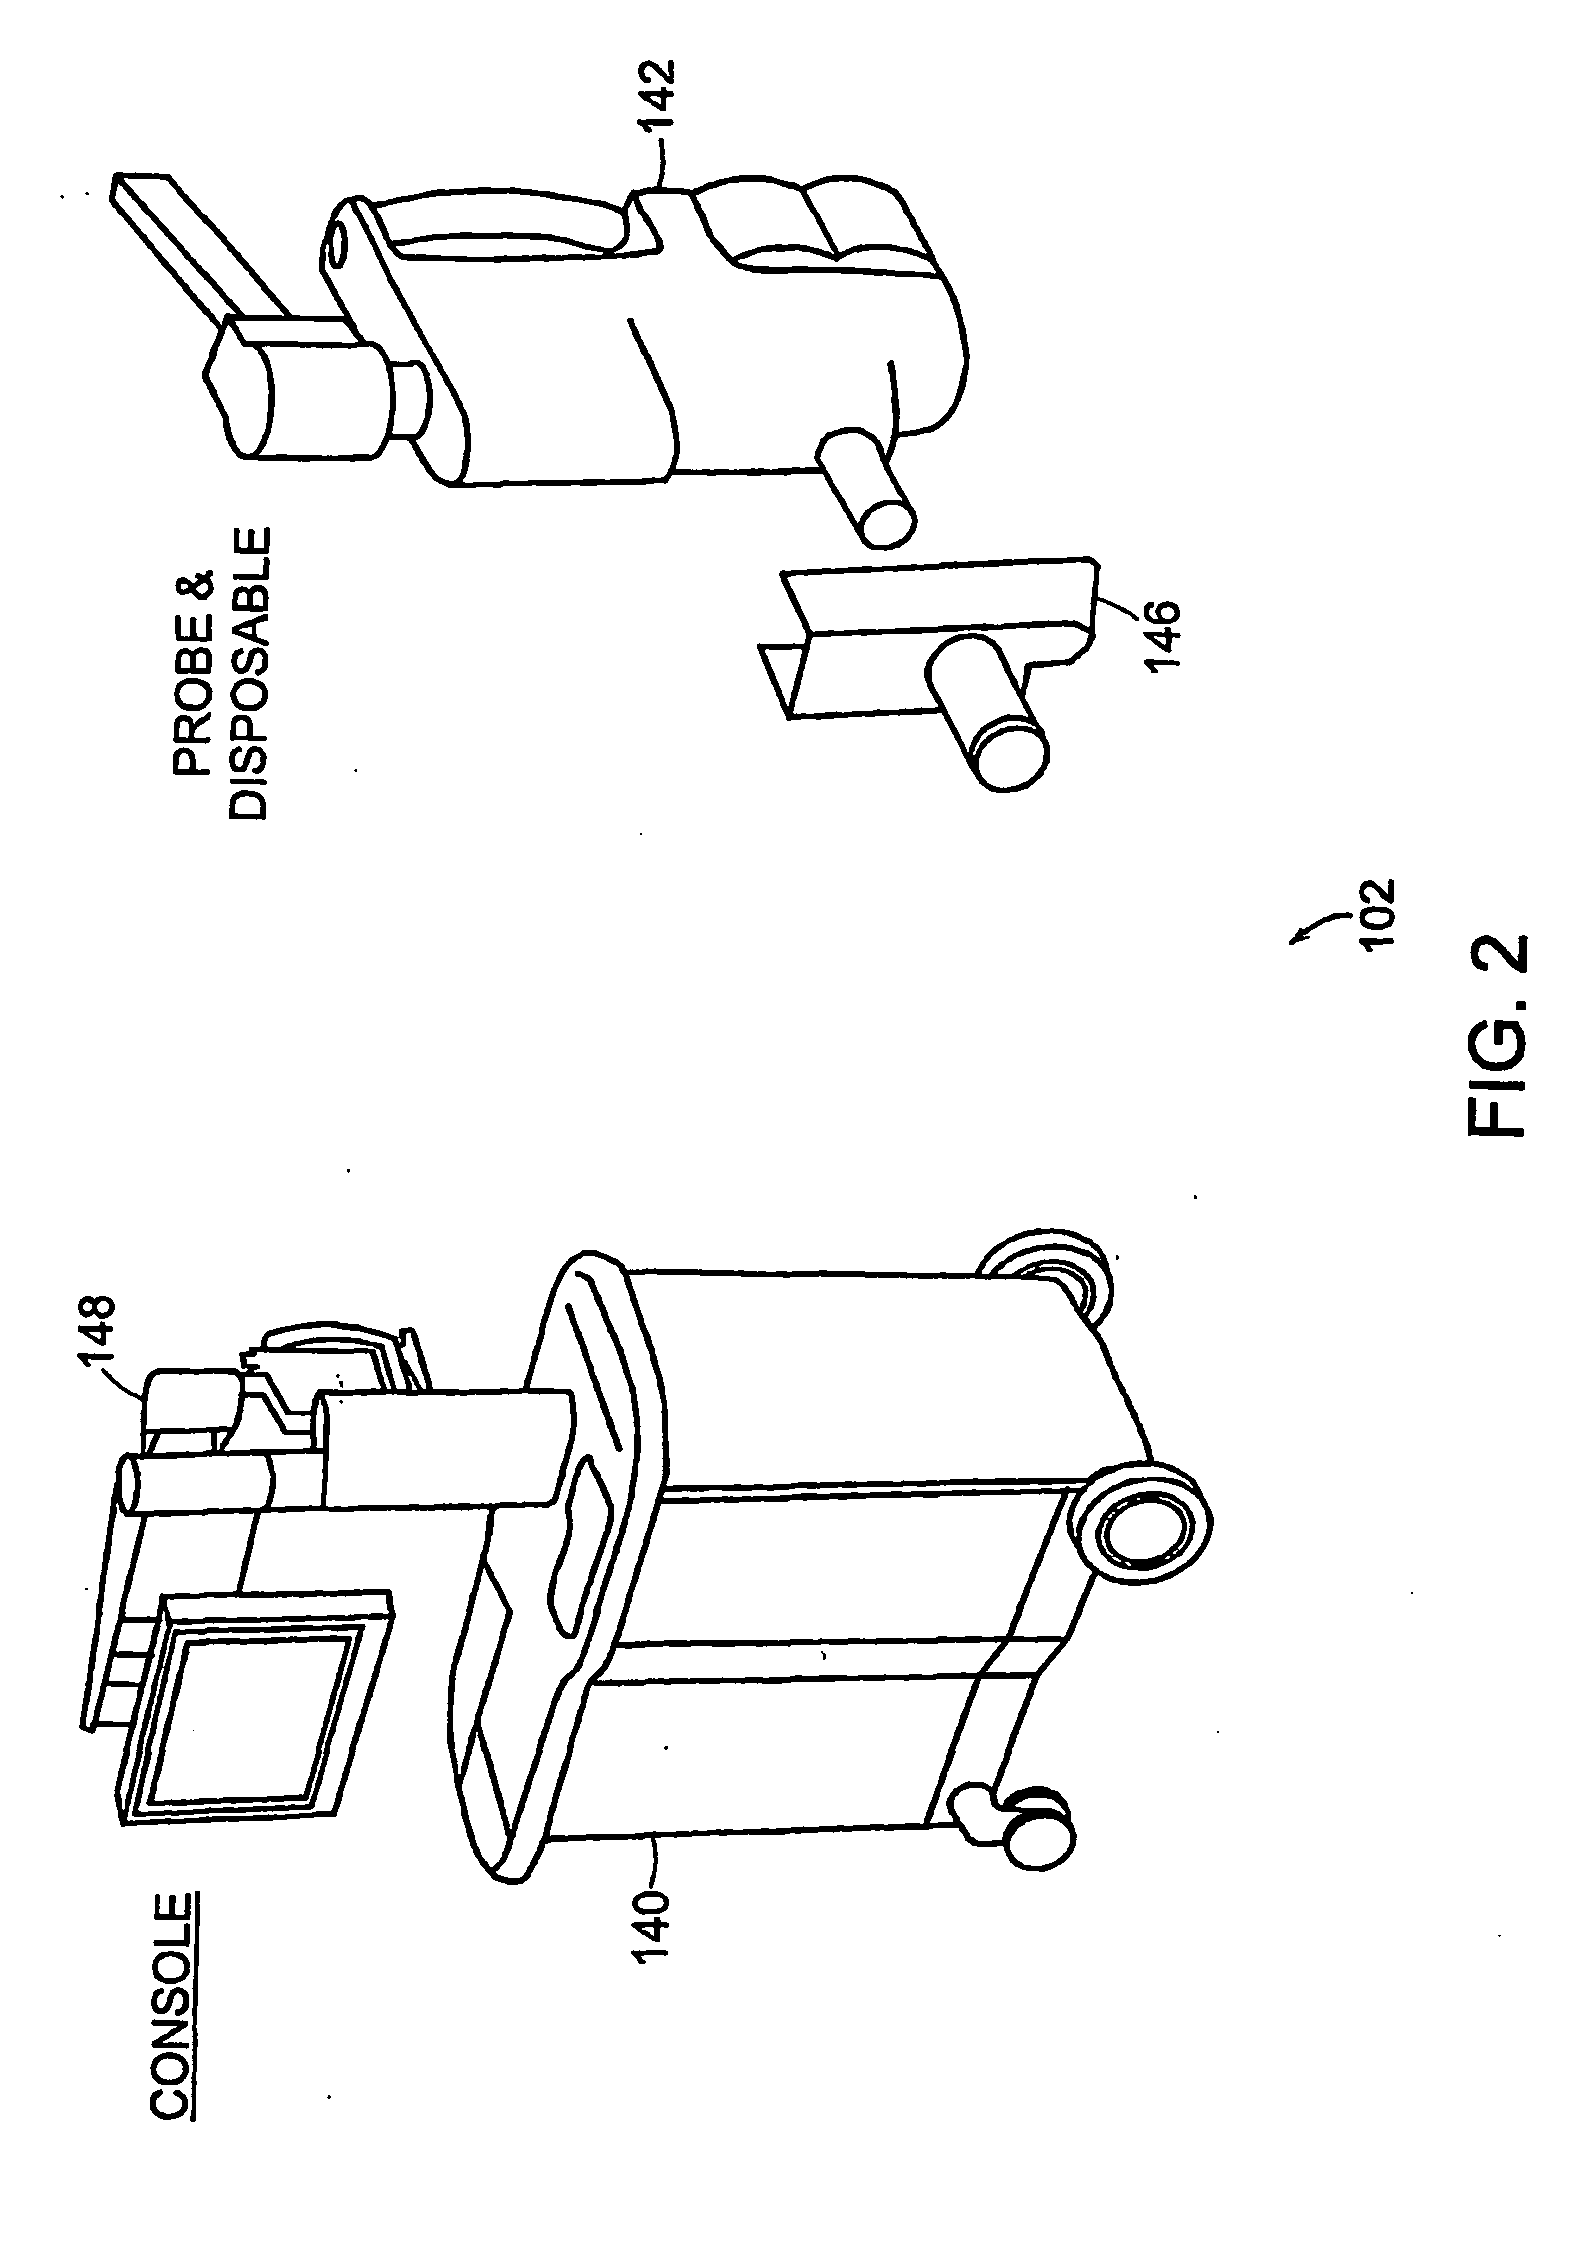 Systems for identifying, displaying, marking, and treating suspect regions of tissue